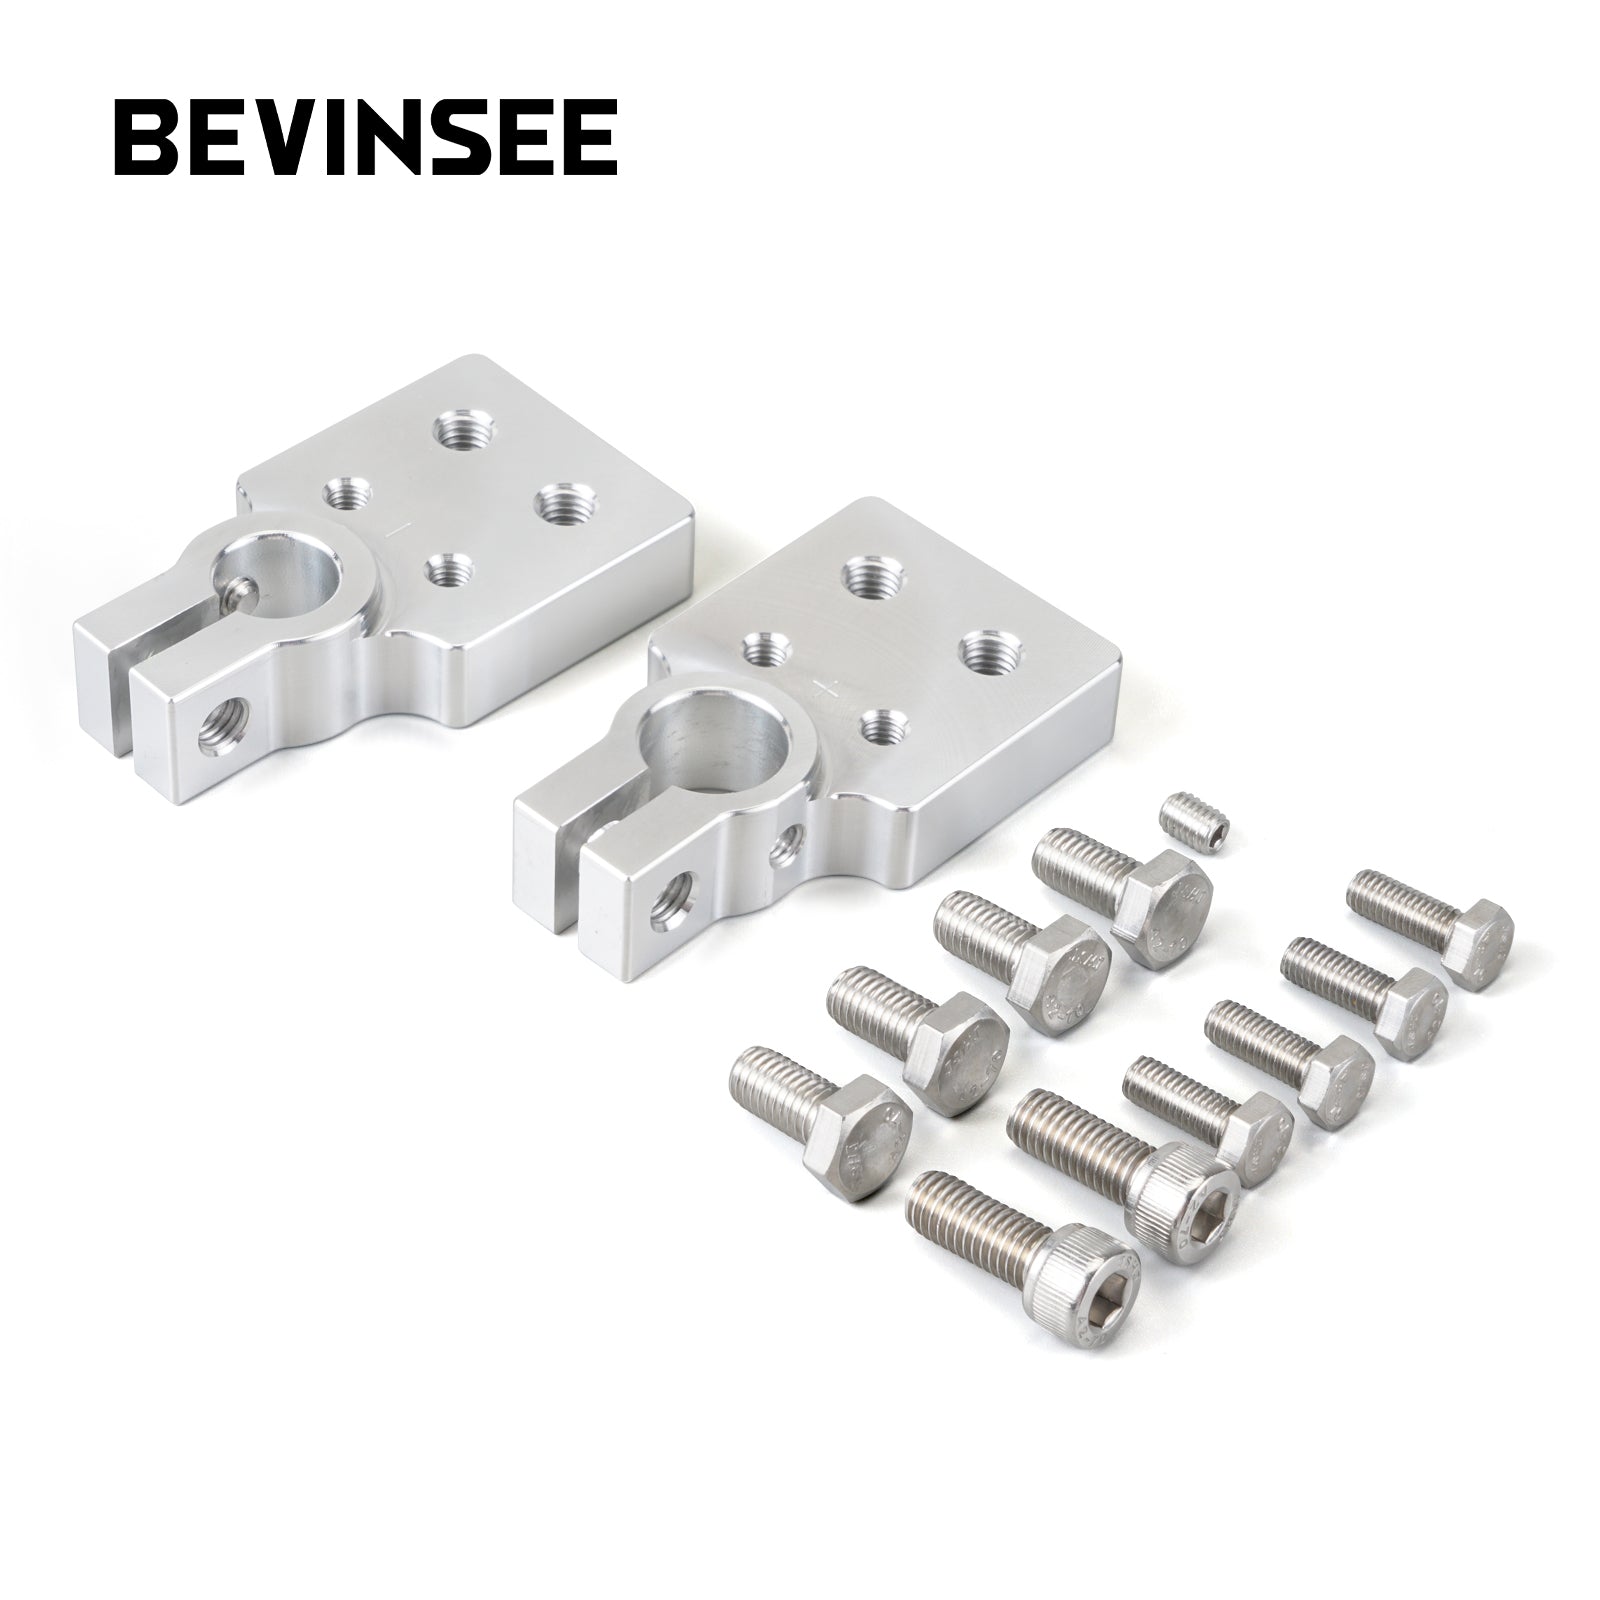 BEVINSEE Car Audio Modification 4 Spot Flat Lug Battery Terminal for SAE Top Post Clamp